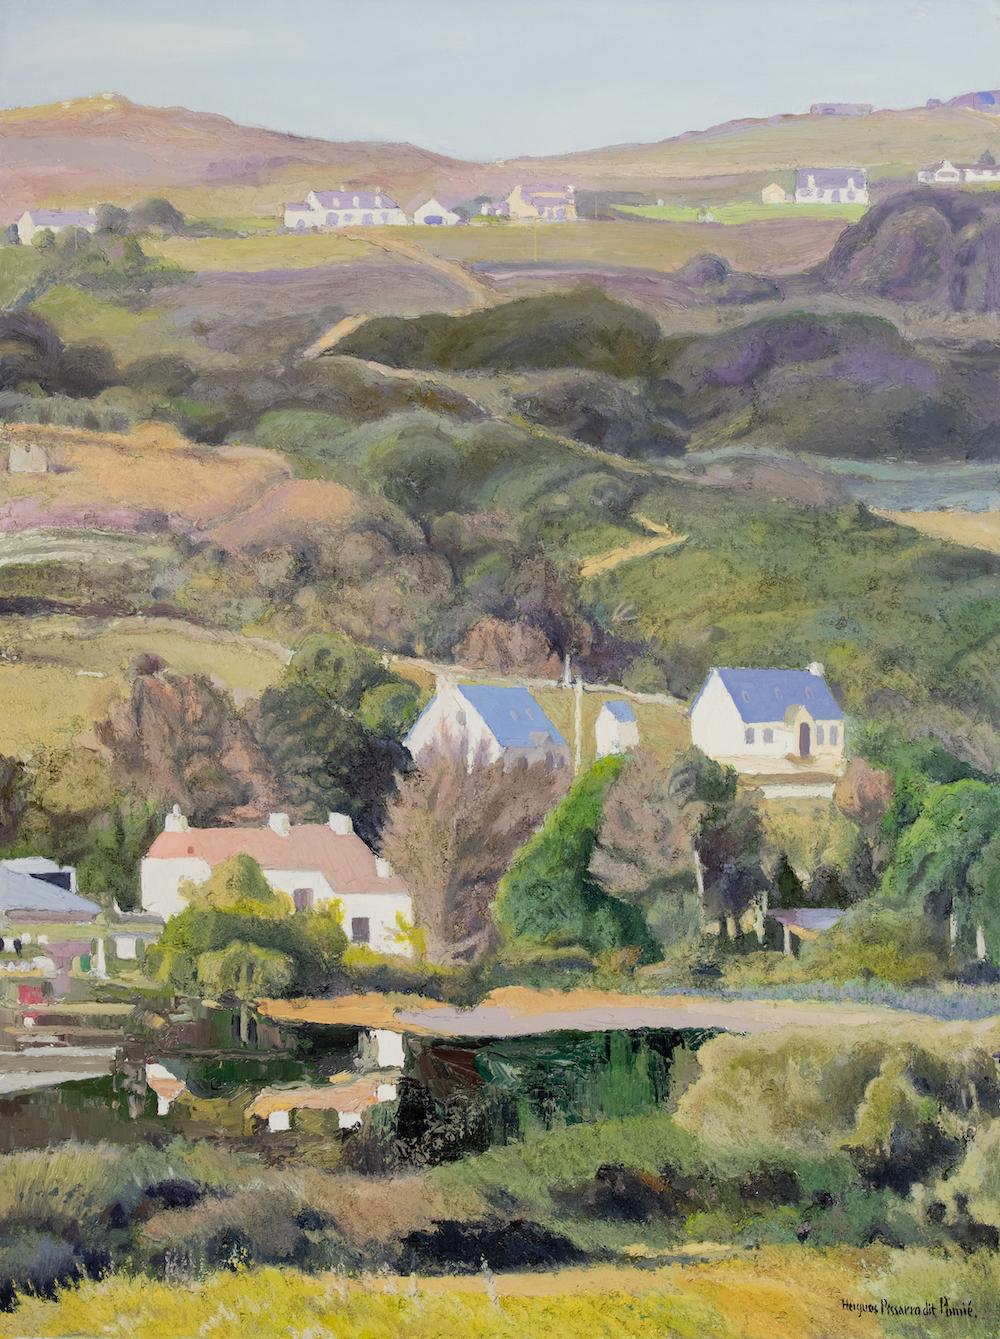 Jo & Jimmy Gallaher Farm and Upper Clendra by Hugues Claude Pissarro (b. 1935)
Oil on canvas
130 x 97cm (51 ¹/₈ x 38 ¹/₄ x inches)
Signed lower right, Hugues Pissarro dit Pomié
Executed in 2019

This work is accompanied by a certificate of